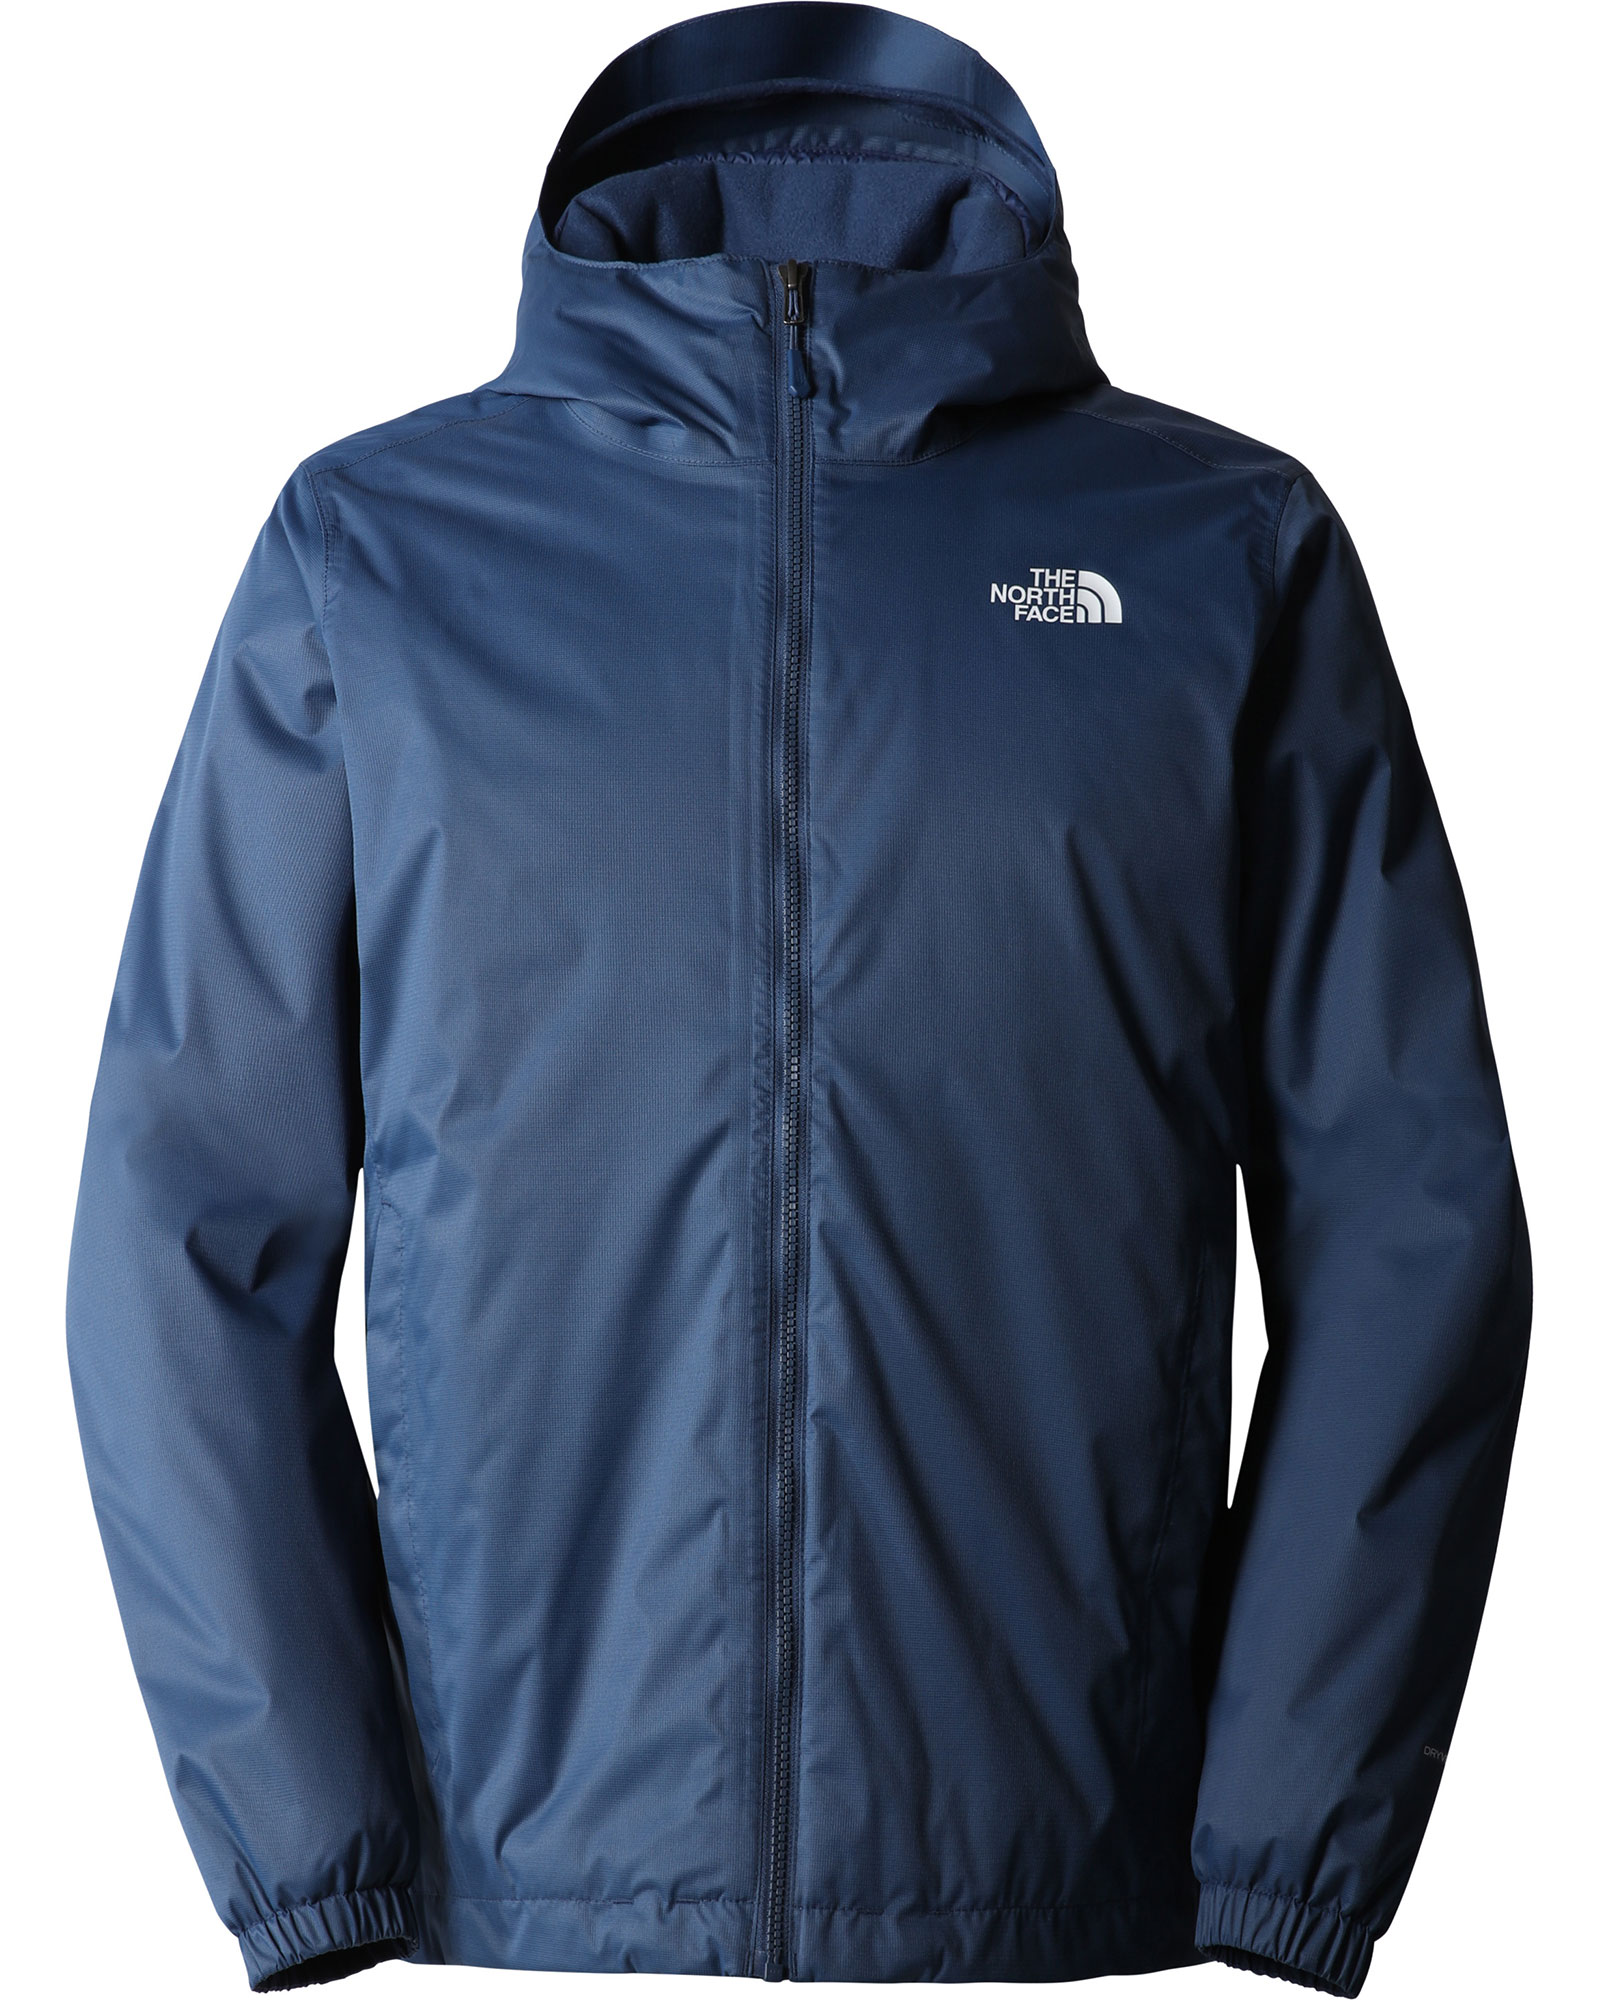 The North Face Quest DryVent Men’s Insulated Jacket - Shady Blue Black Heather XXL